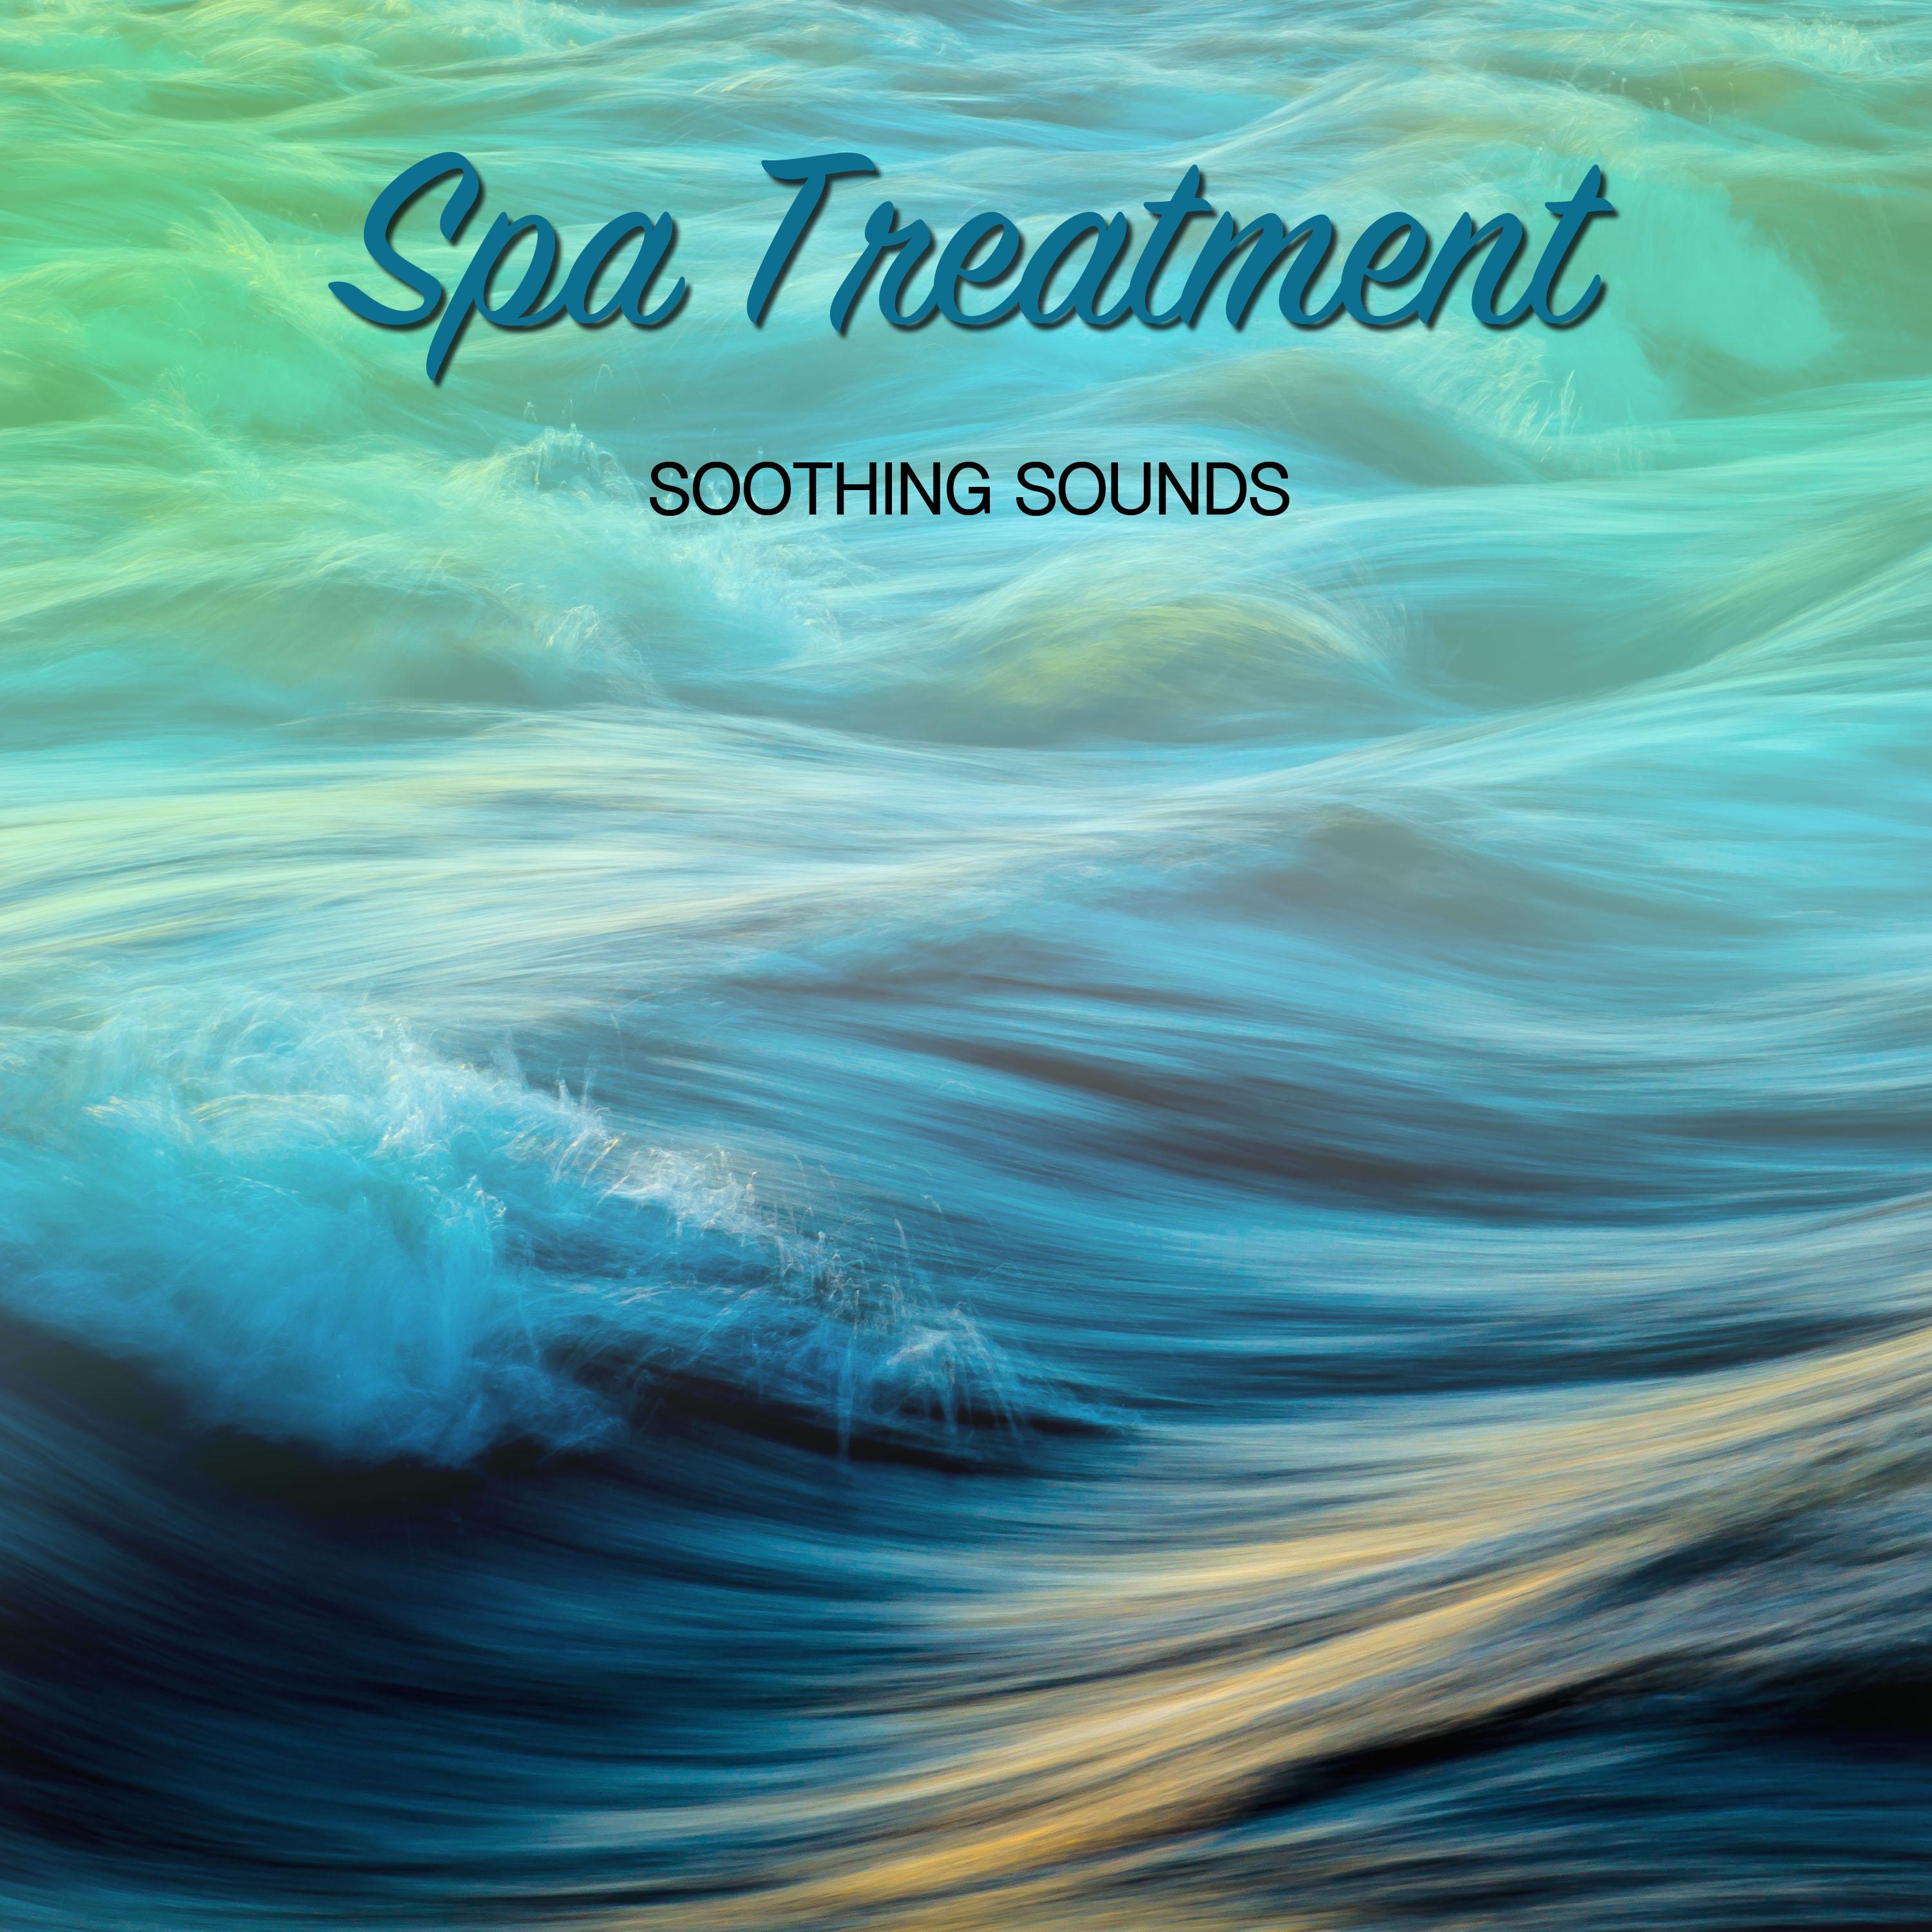 13 Soothing Sounds for Meditation & Spa Treatment